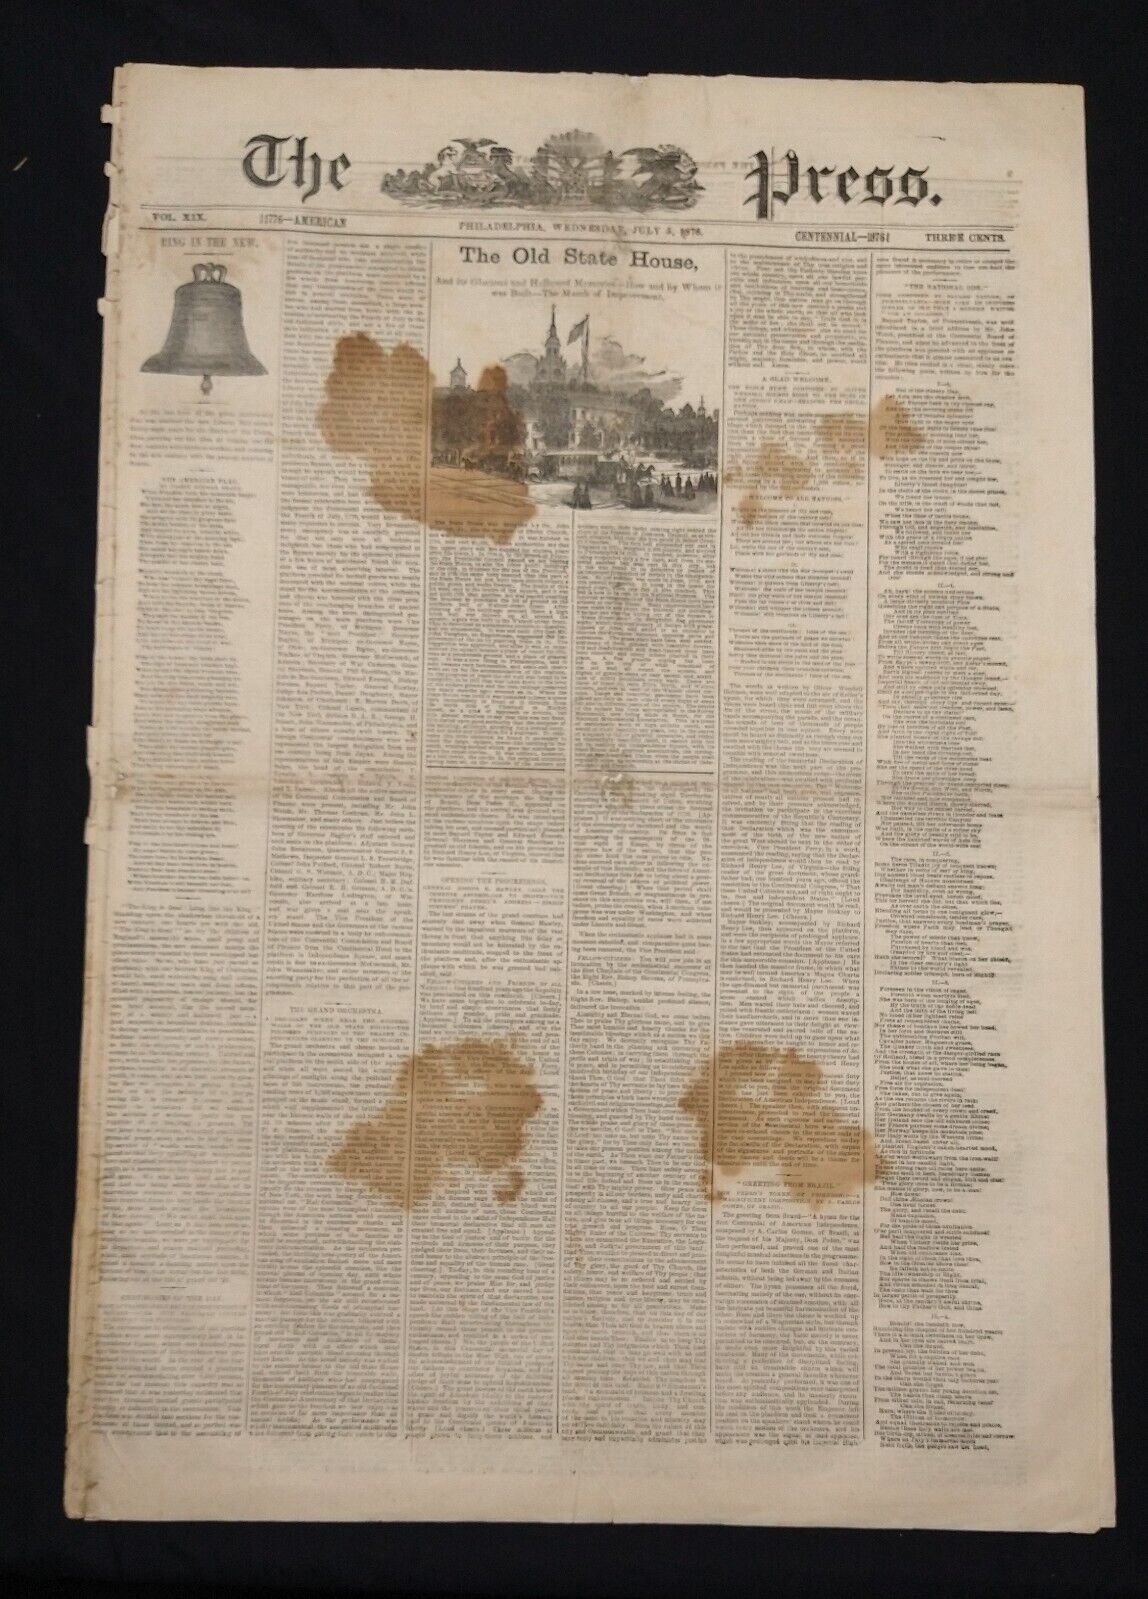 The PHILADEPHIA PRESS & CHRONICLE July 5, 1876 CENTENIIAL lot 2 Complete Papers